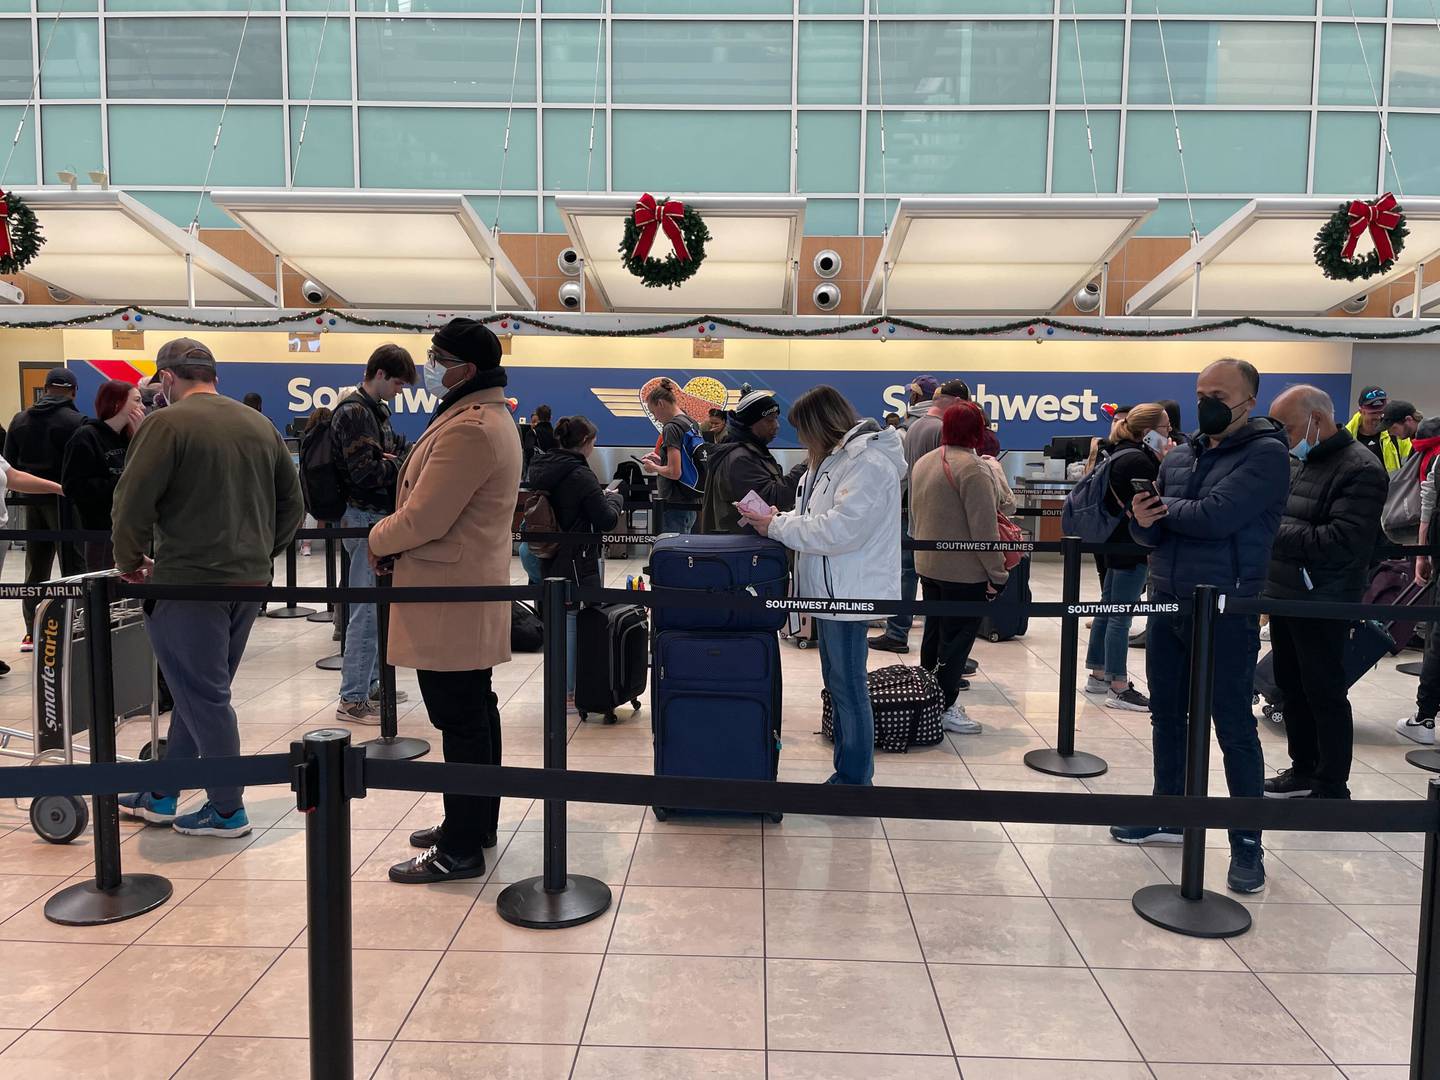 Southwest Airlines travelers stand in a long line at Baltimore/Washington International Airport after thousands of flights were canceled over the holiday weekend.